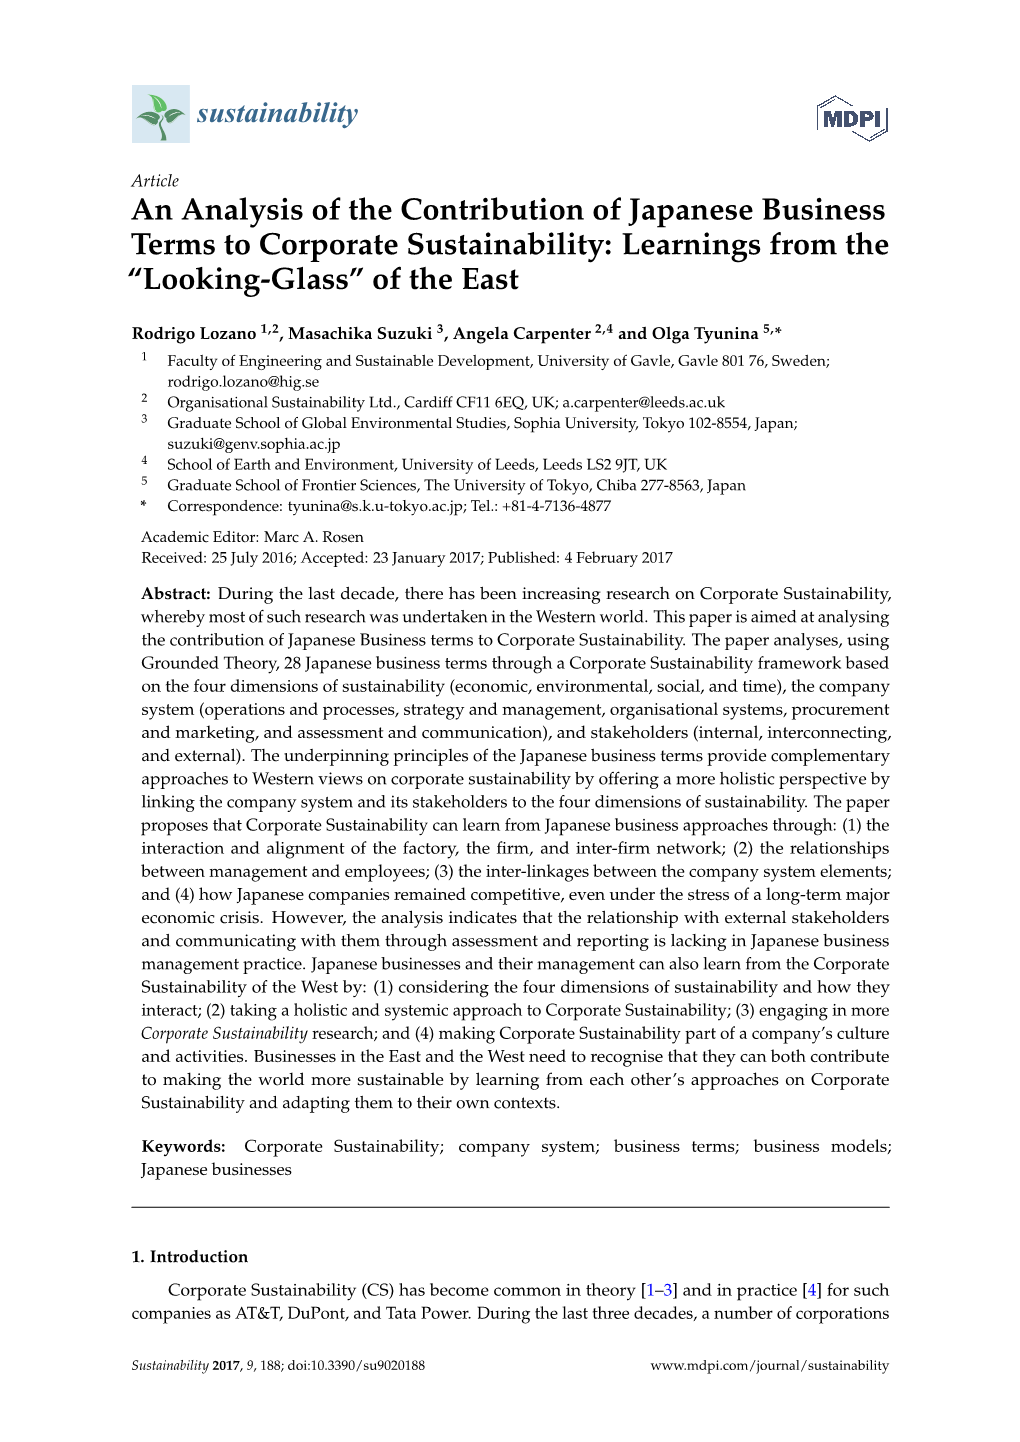 An Analysis of the Contribution of Japanese Business Terms to Corporate Sustainability: Learnings from the “Looking-Glass” of the East